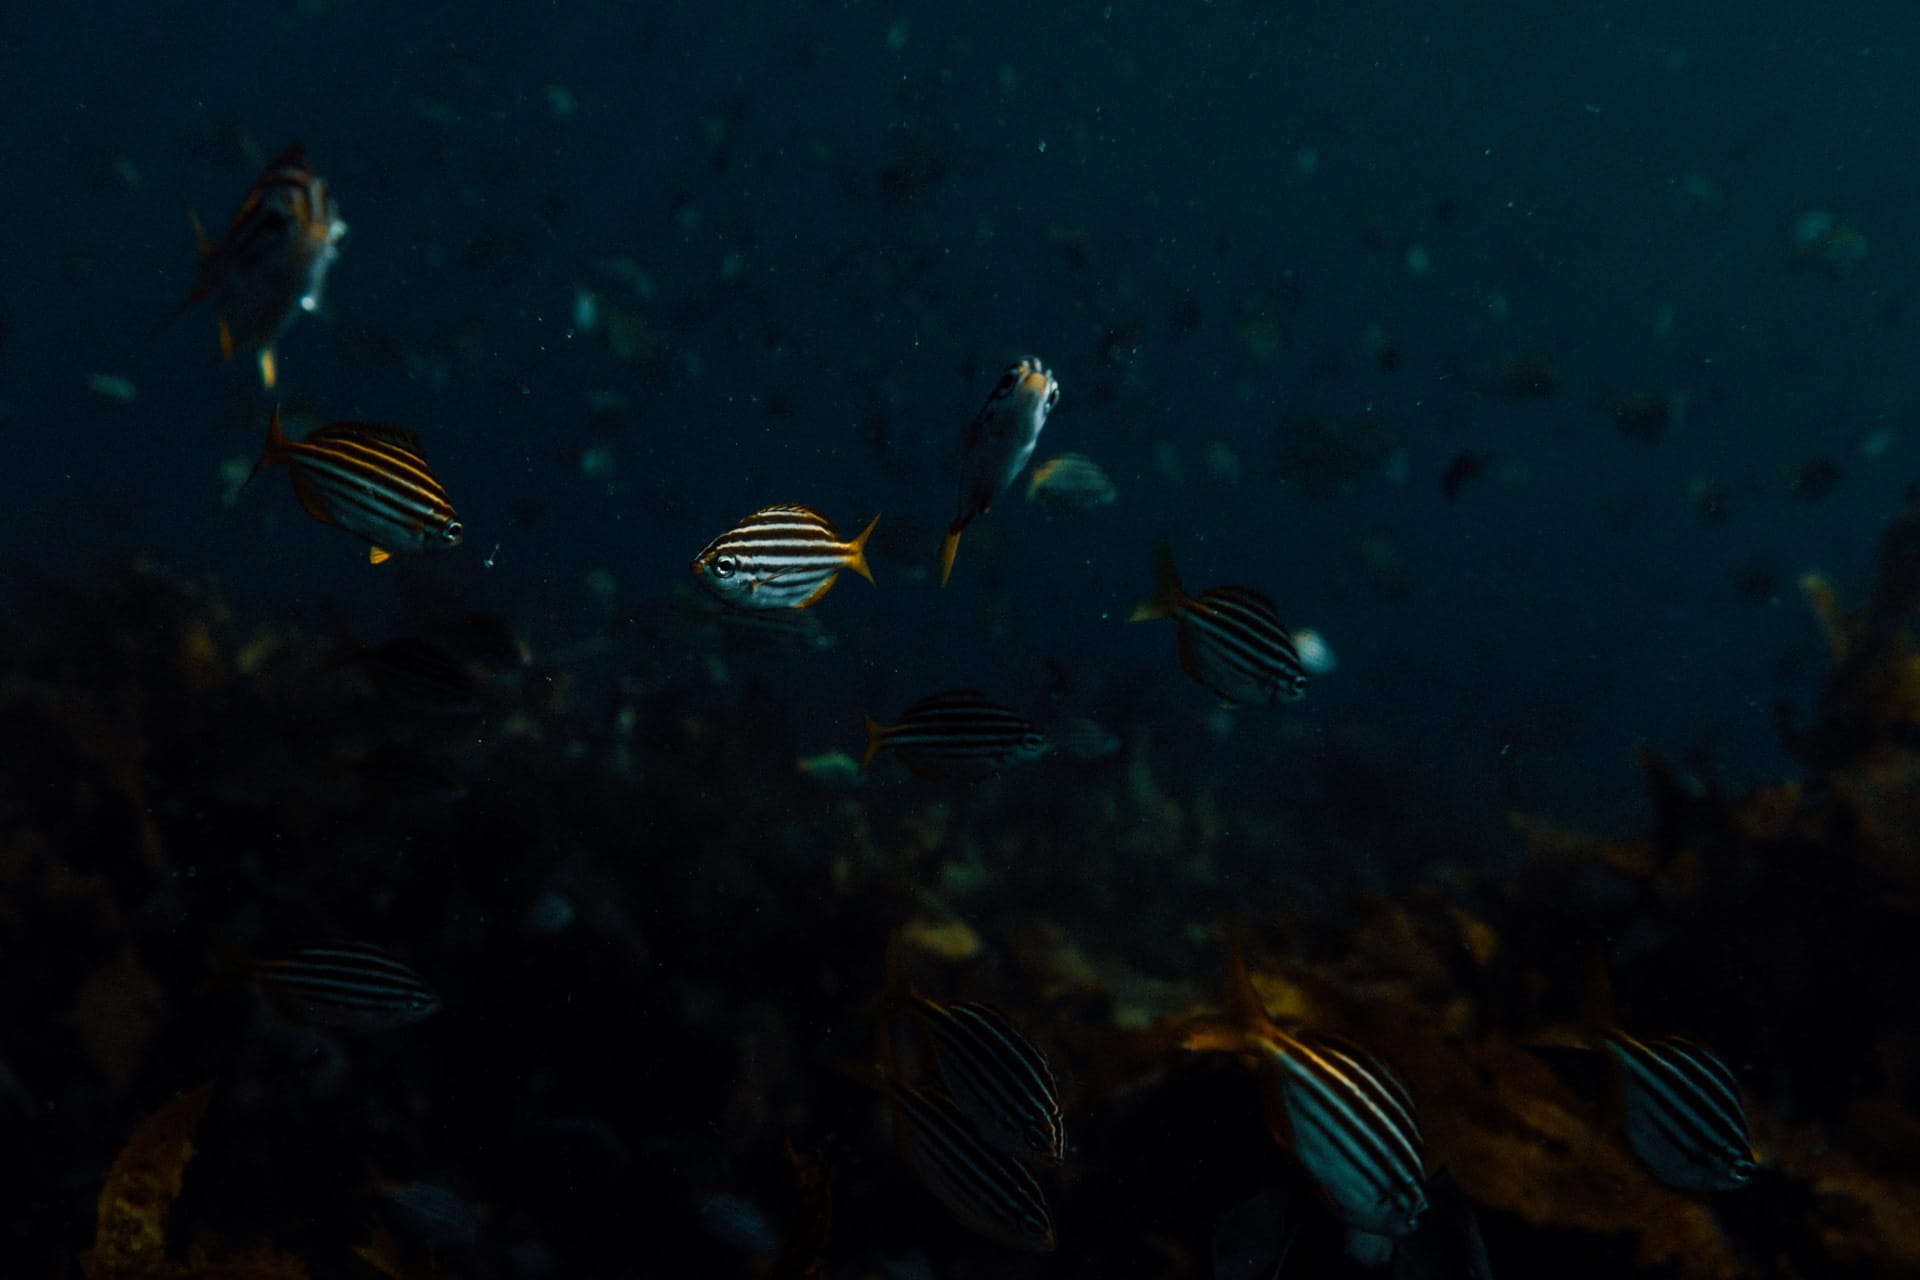 Meet The Underwater Residents of Sydney’s Cabbage Tree Bay Aquatic Reserve – Photo Essay